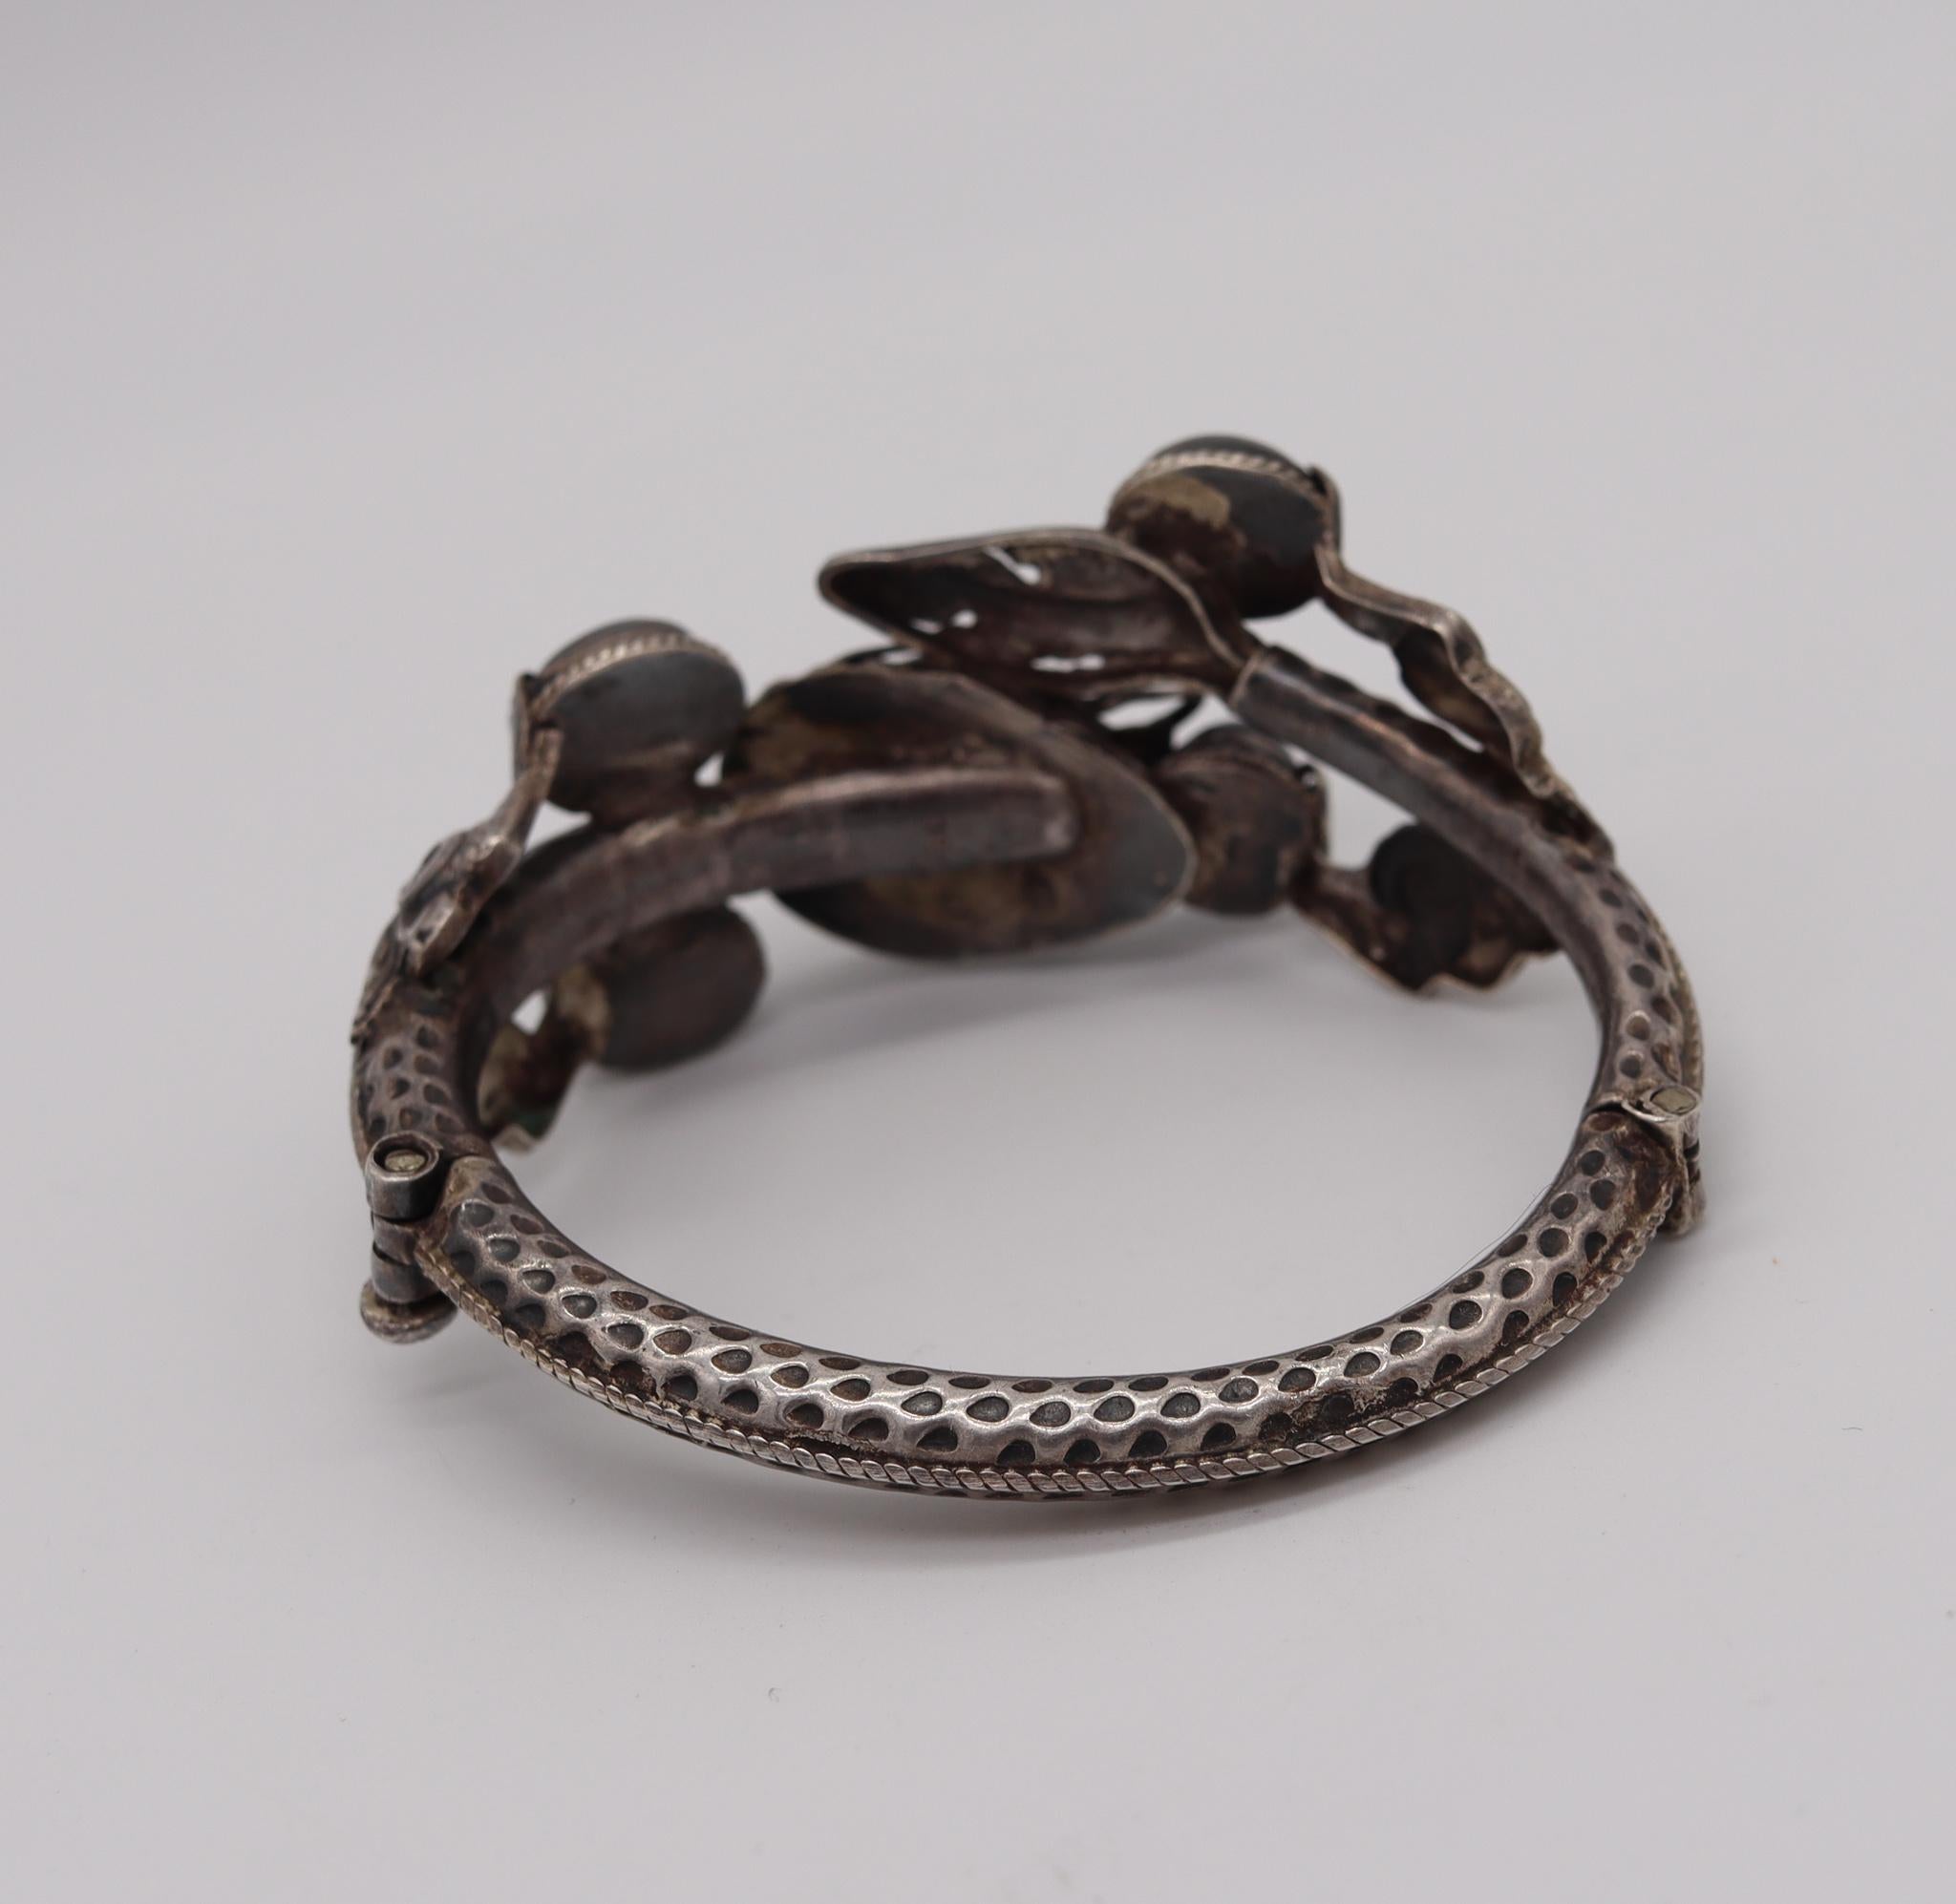 China 1900 Export Dragon Bracelet in 925 Sterling Silver with Cat's Eye Obsidian In Good Condition In Miami, FL